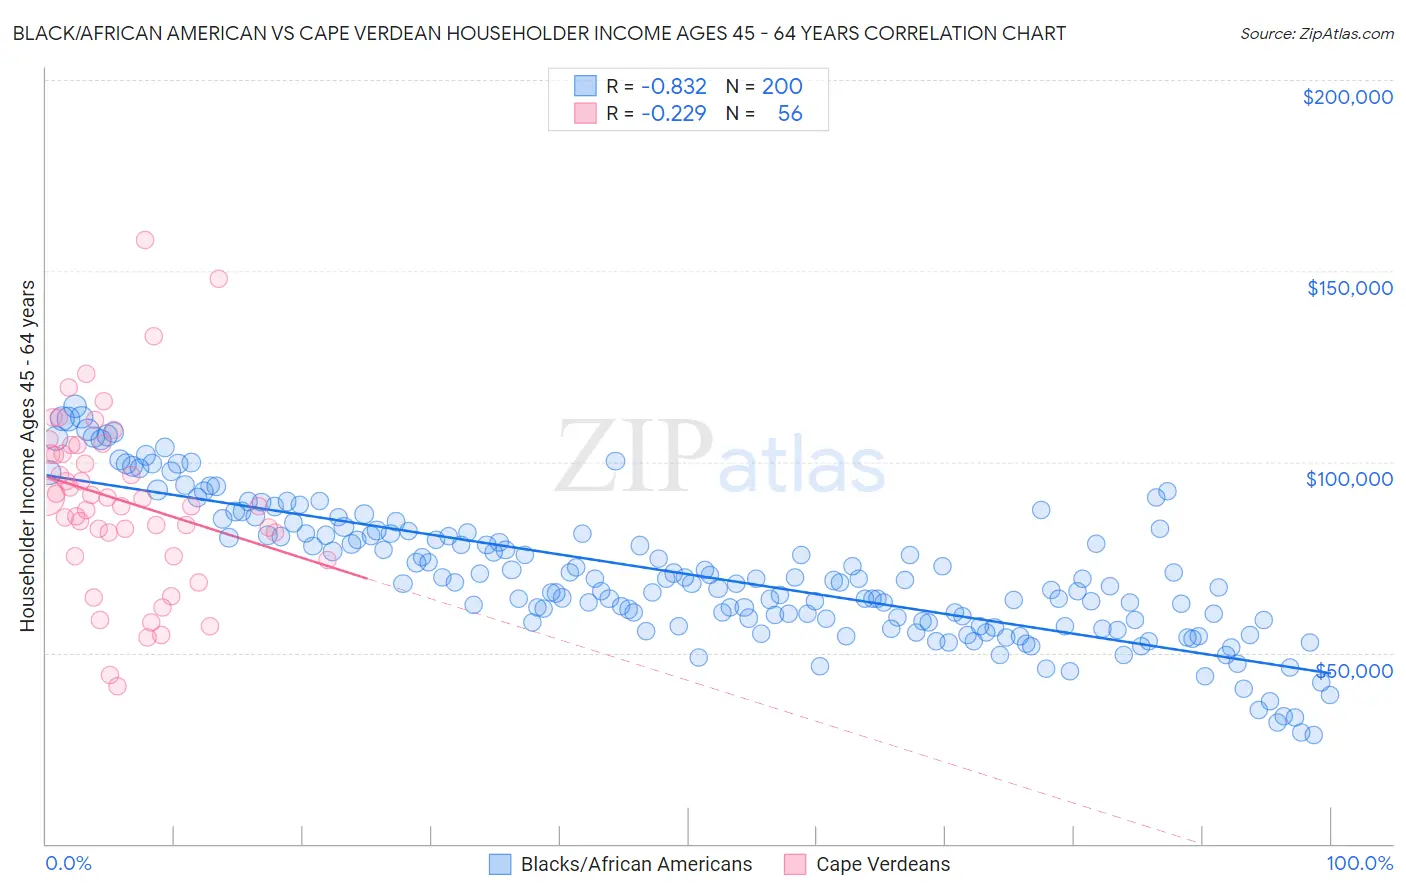 Black/African American vs Cape Verdean Householder Income Ages 45 - 64 years